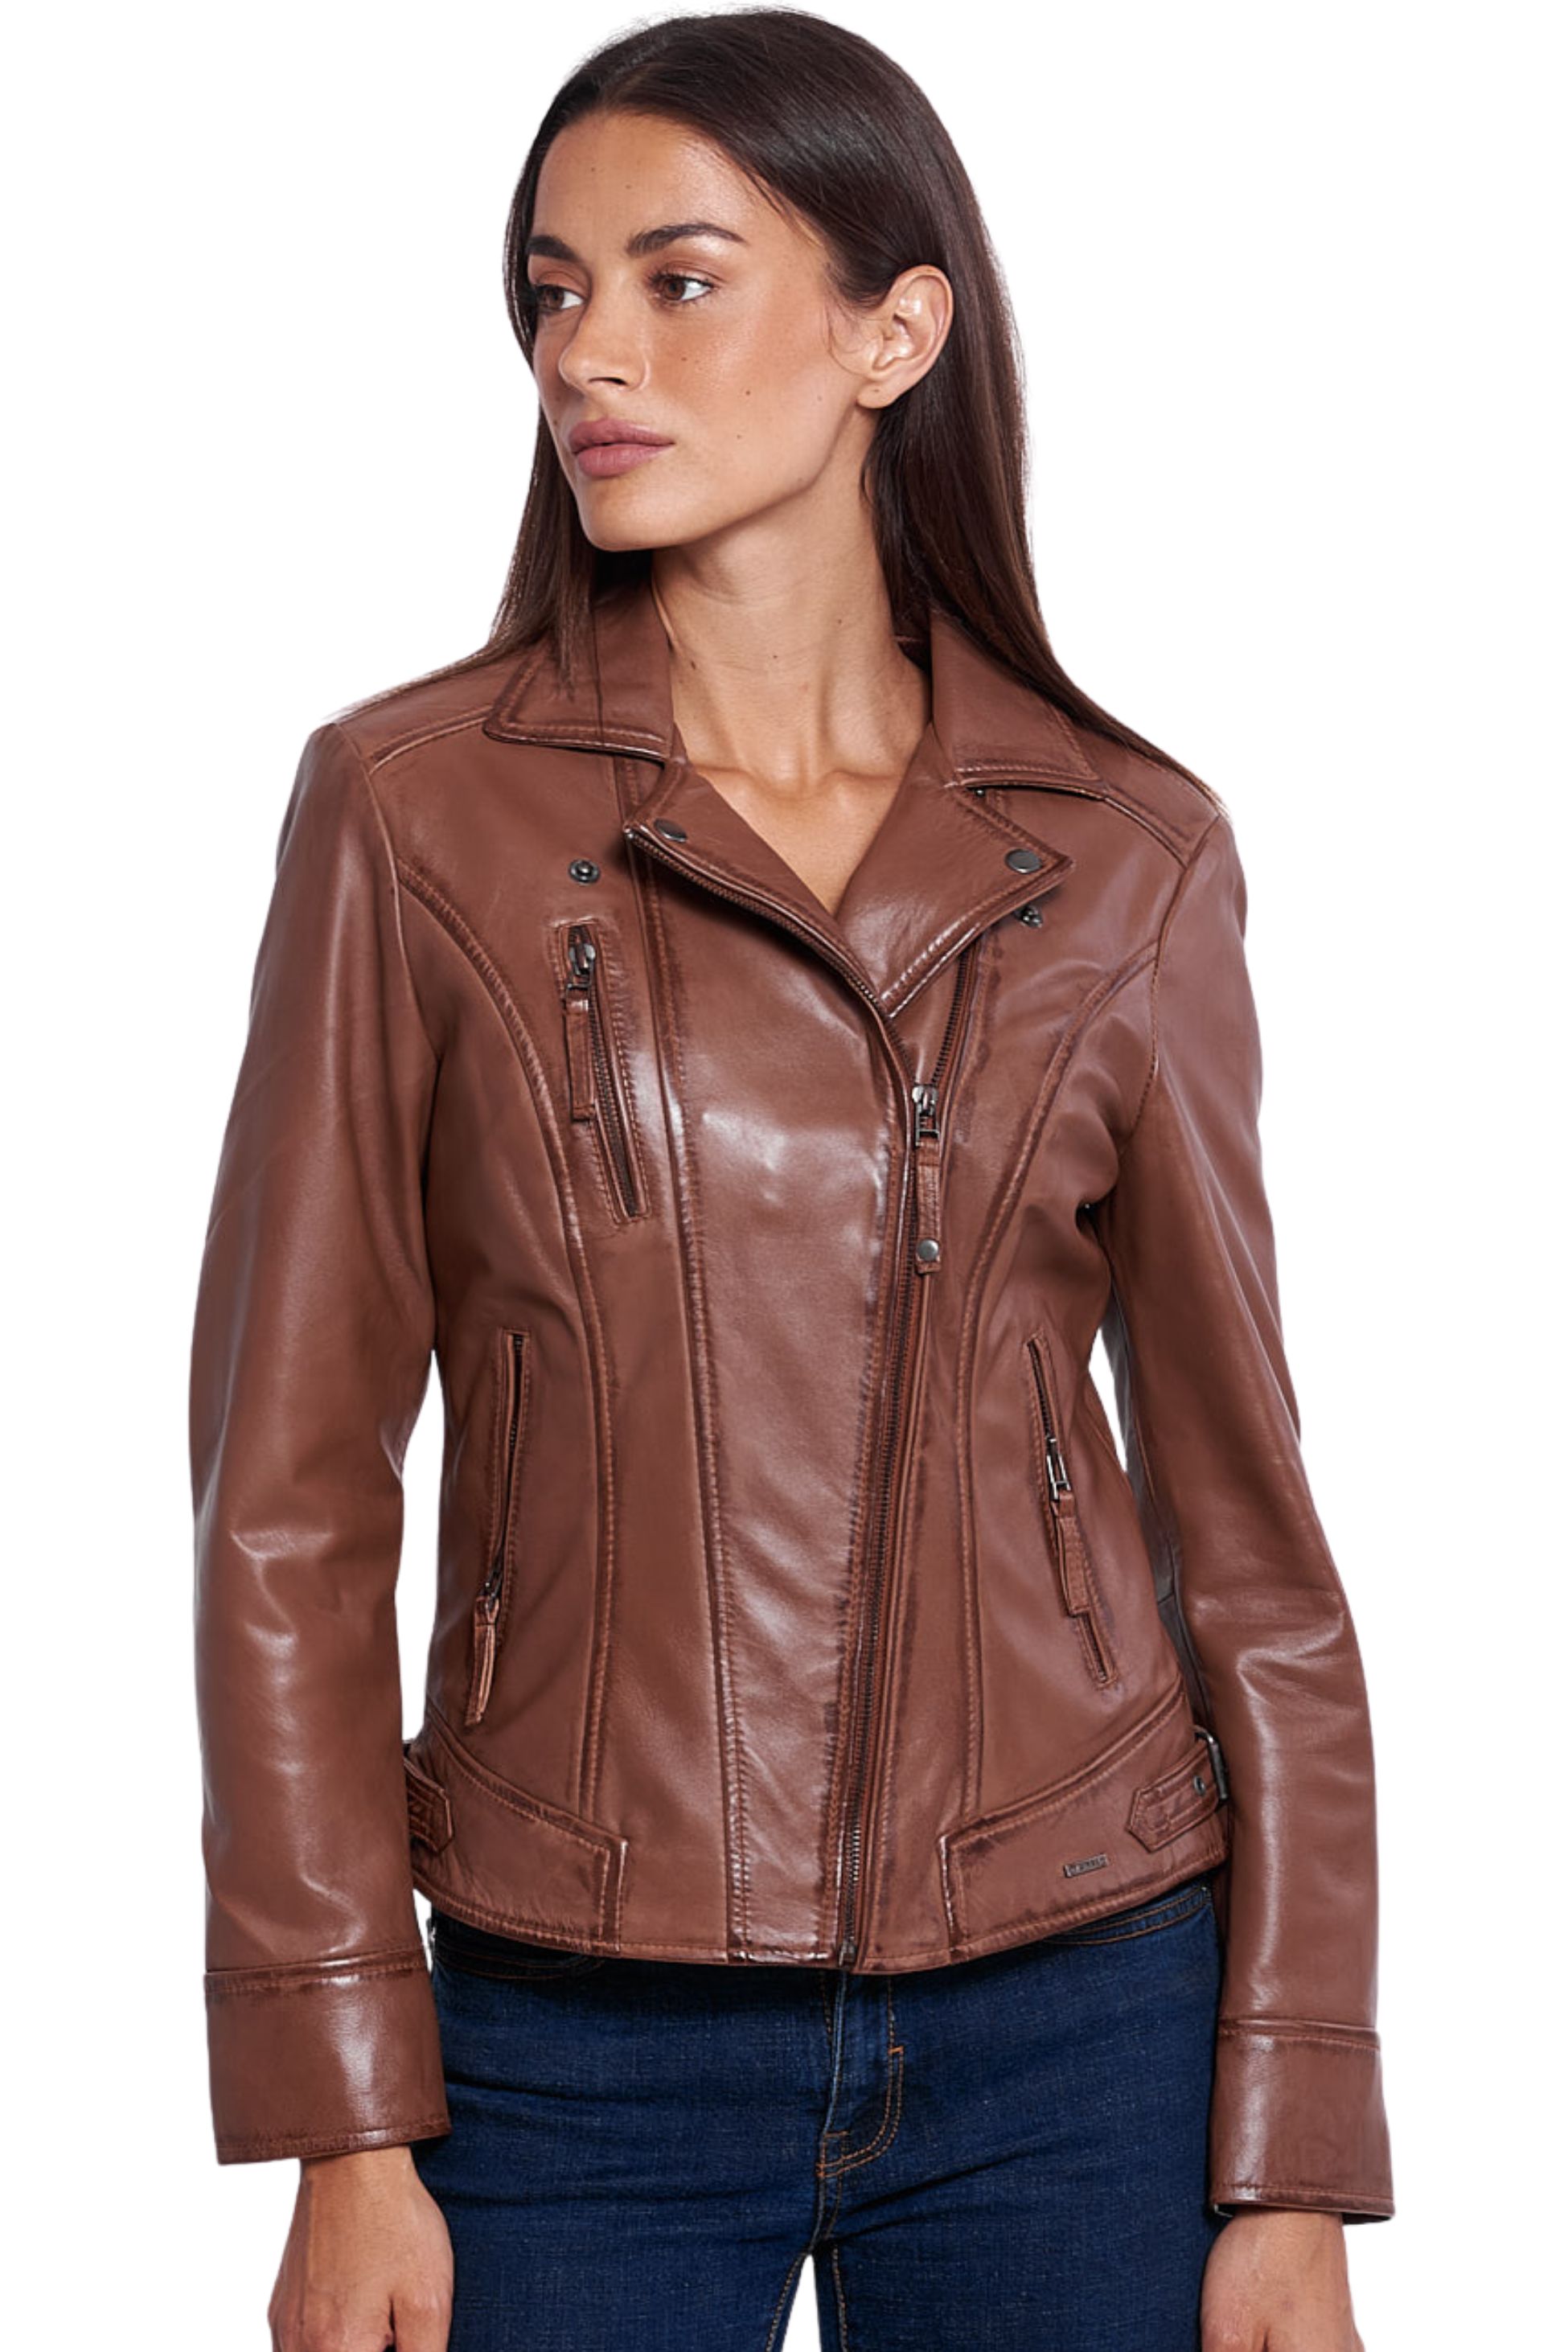 PHEDRA SHEEP COGNAC - AUTHENTIC WOMENS LEATHER JACKET